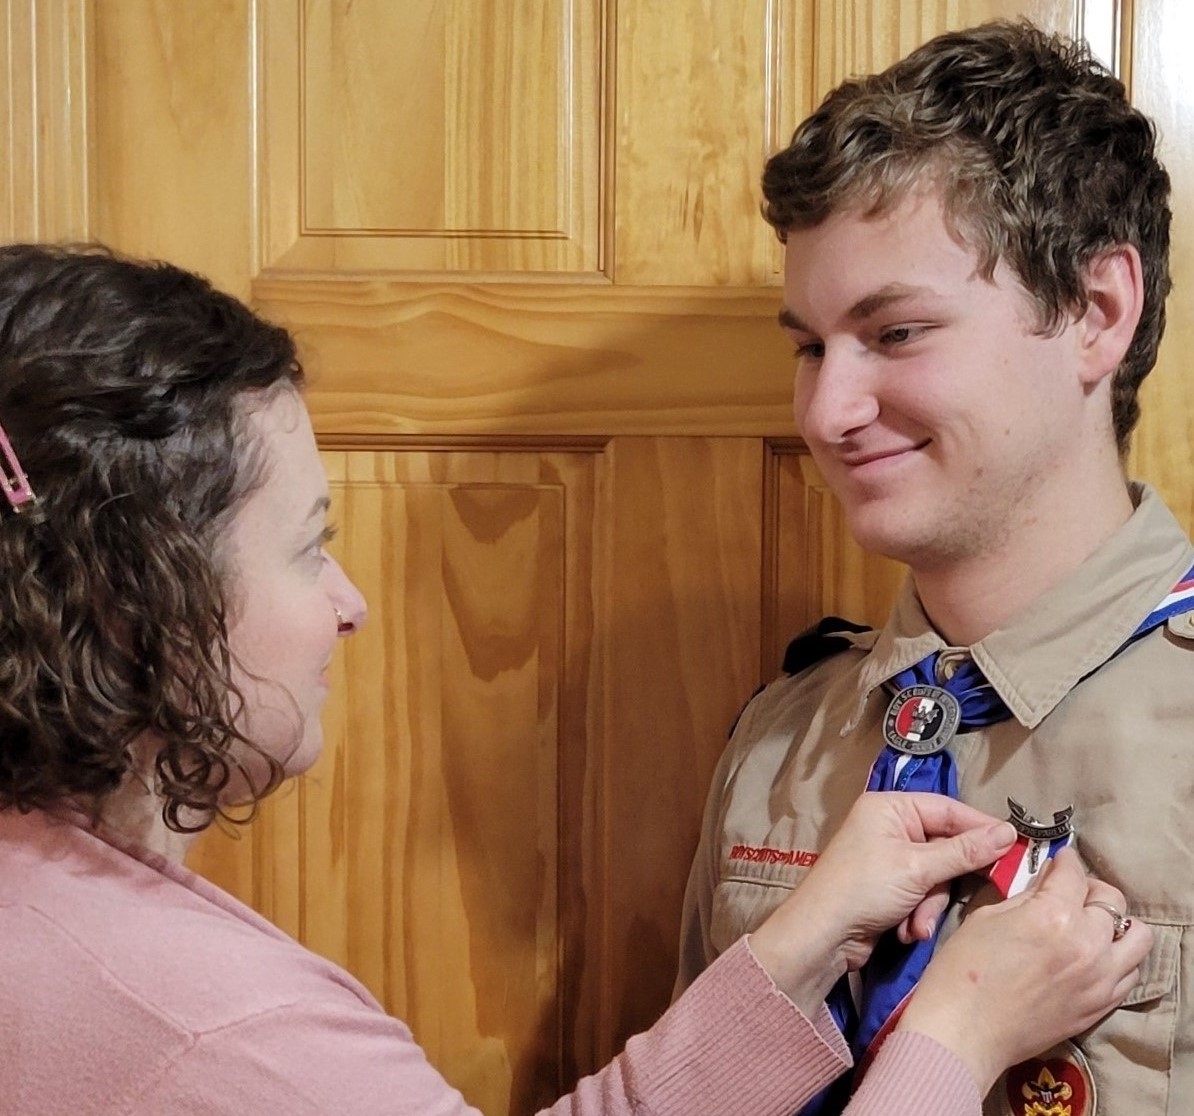 Benjamin Lagasse earns rank of Eagle Scout